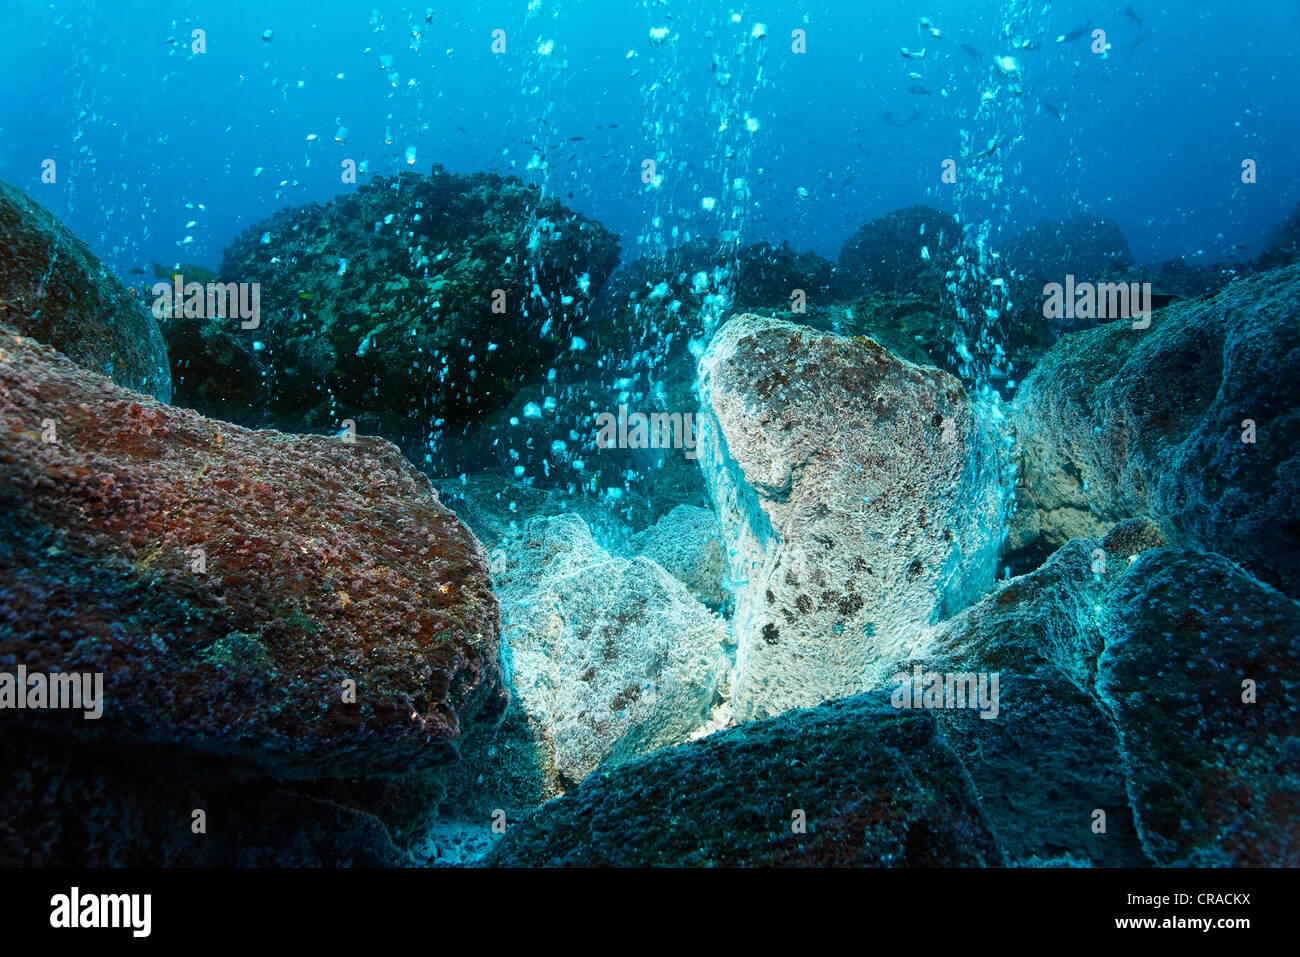 Rocks over a volcanic hot spot, white mineral deposits, hot springs, gas bubbles, overgrown, barnacles (Balanidae), Roca Redonda Stock Photo